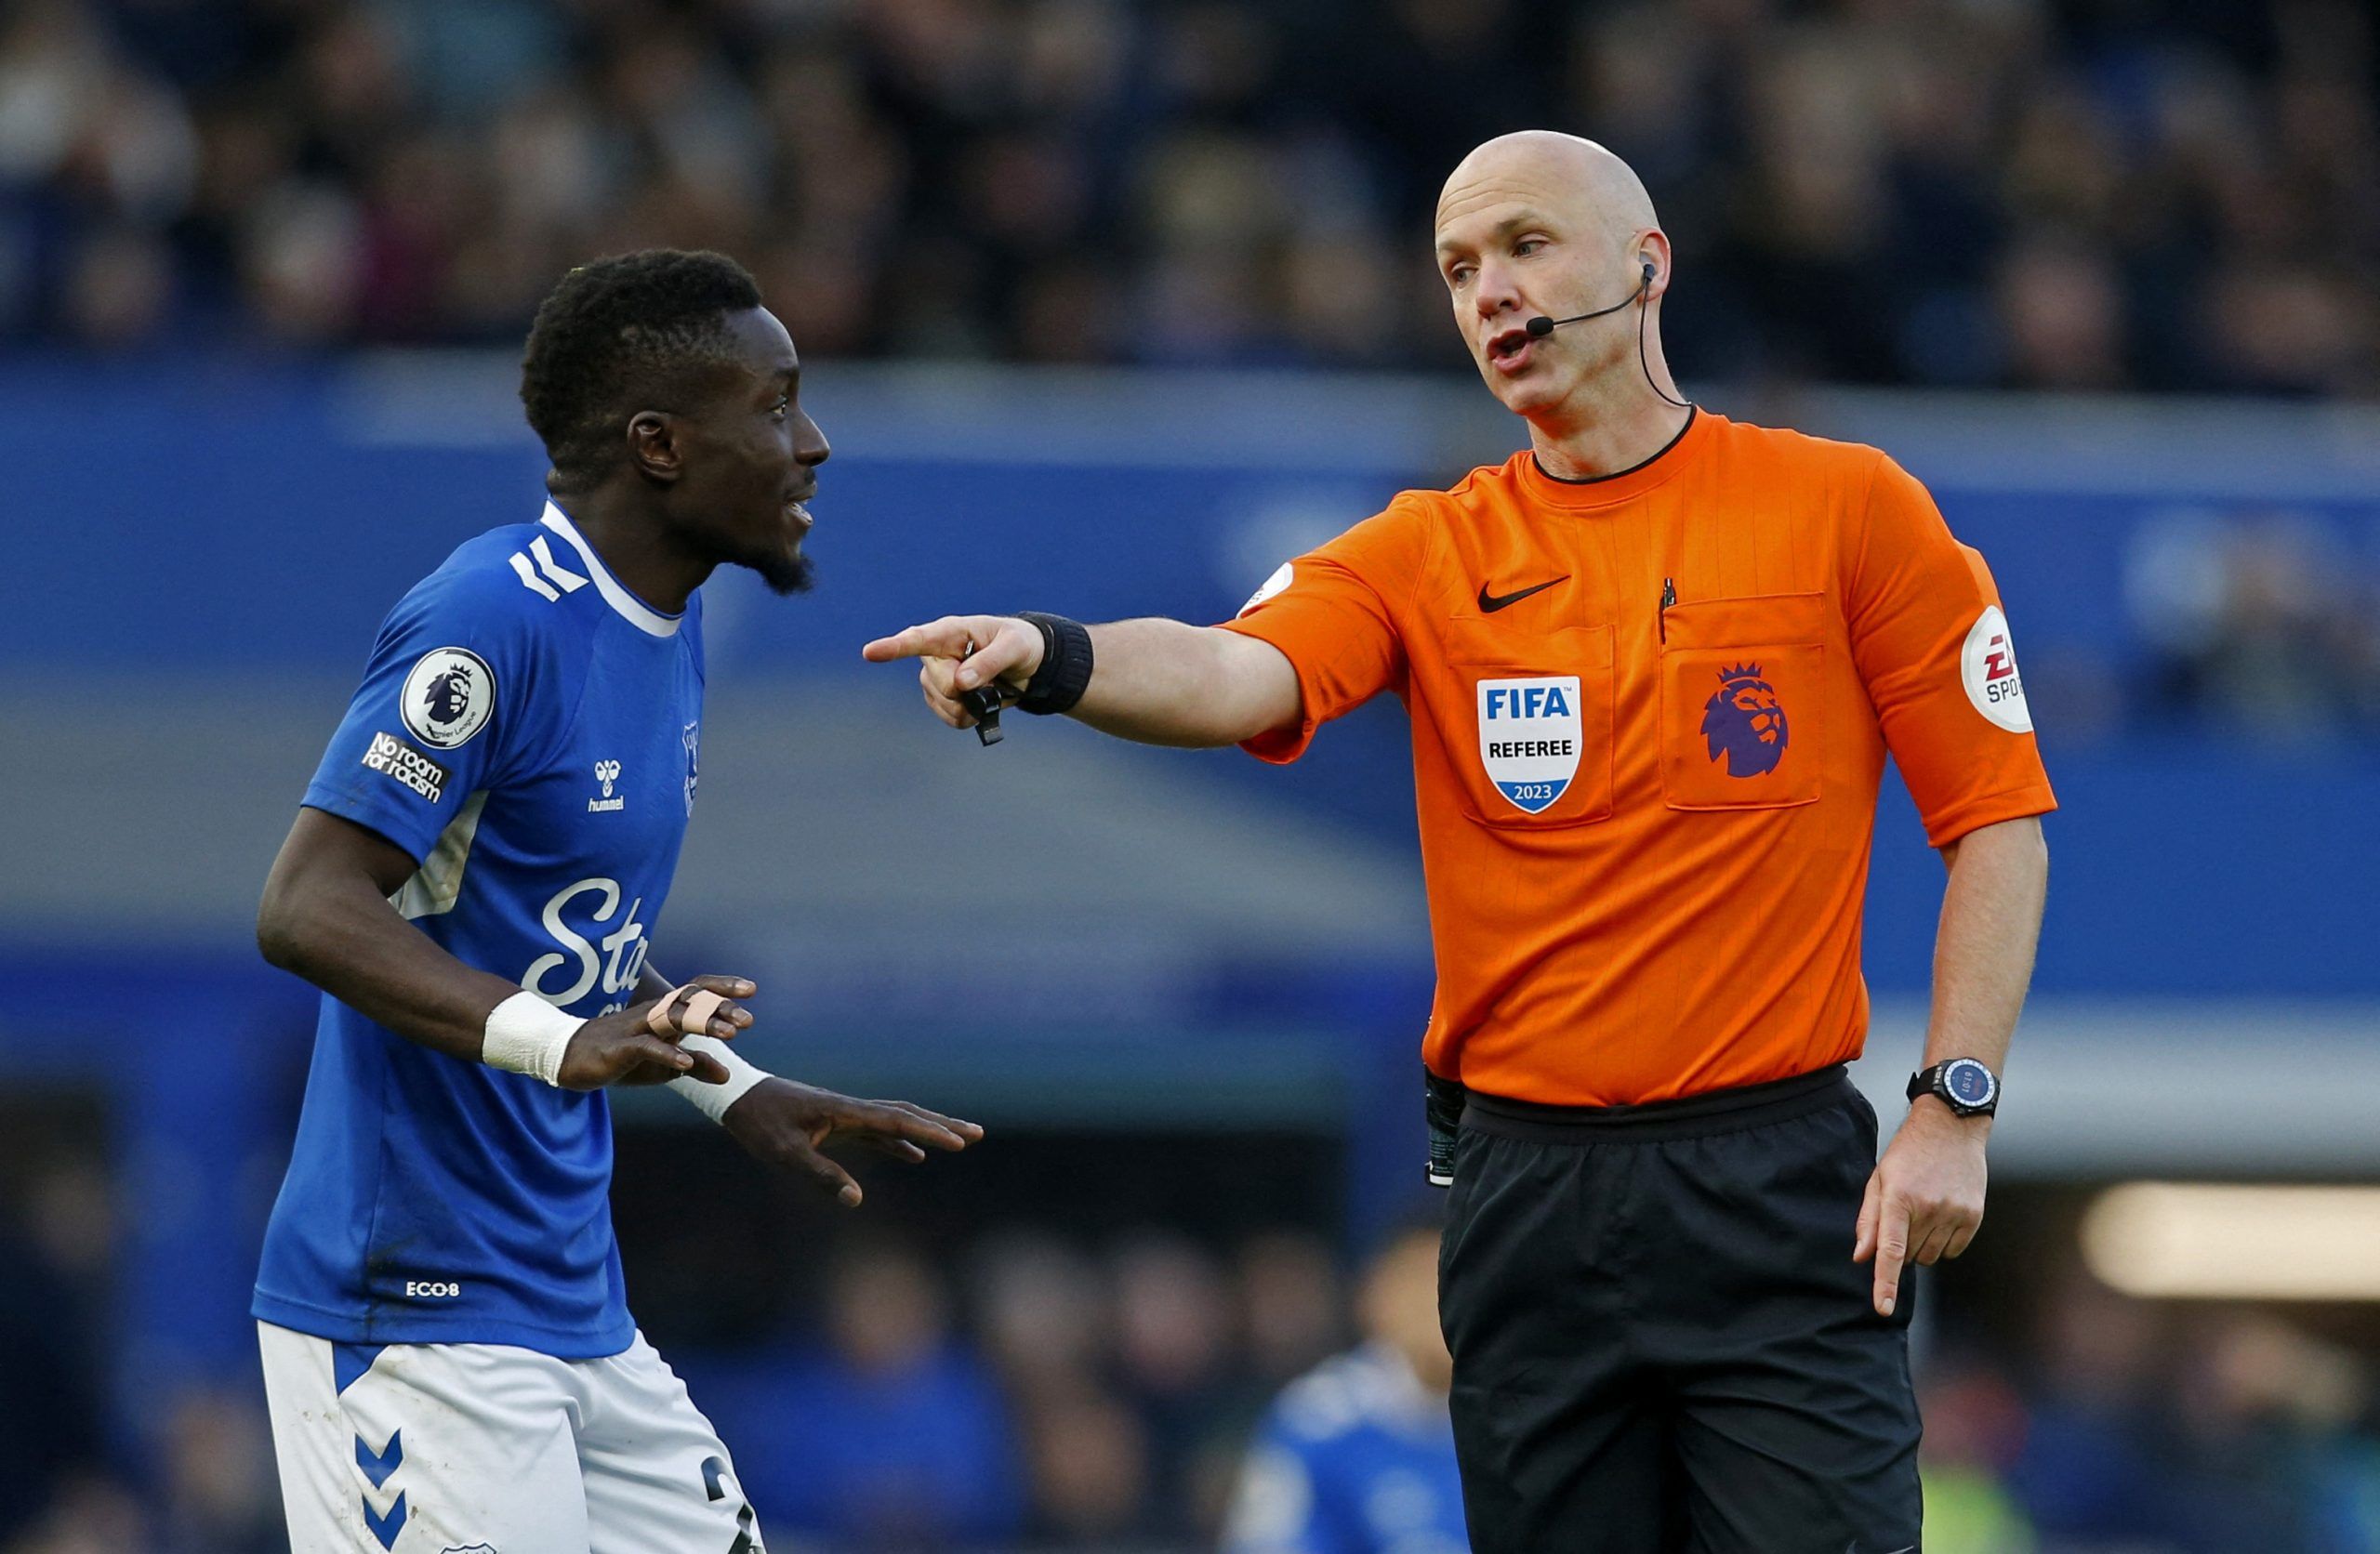 Soccer Football - Premier League - Everton v Aston Villa - Goodison Park, Liverpool, Britain - February 25, 2023 Everton's Idrissa Gueye remonstates with referee Anthony Taylor after a penalty is awarded to Aston Villa Action Images via Reuters/Ed Sykes EDITORIAL USE ONLY. No use with unauthorized audio, video, data, fixture lists, club/league logos or 'live' services. Online in-match use limited to 75 images, no video emulation. No use in betting, games or single club /league/player publication